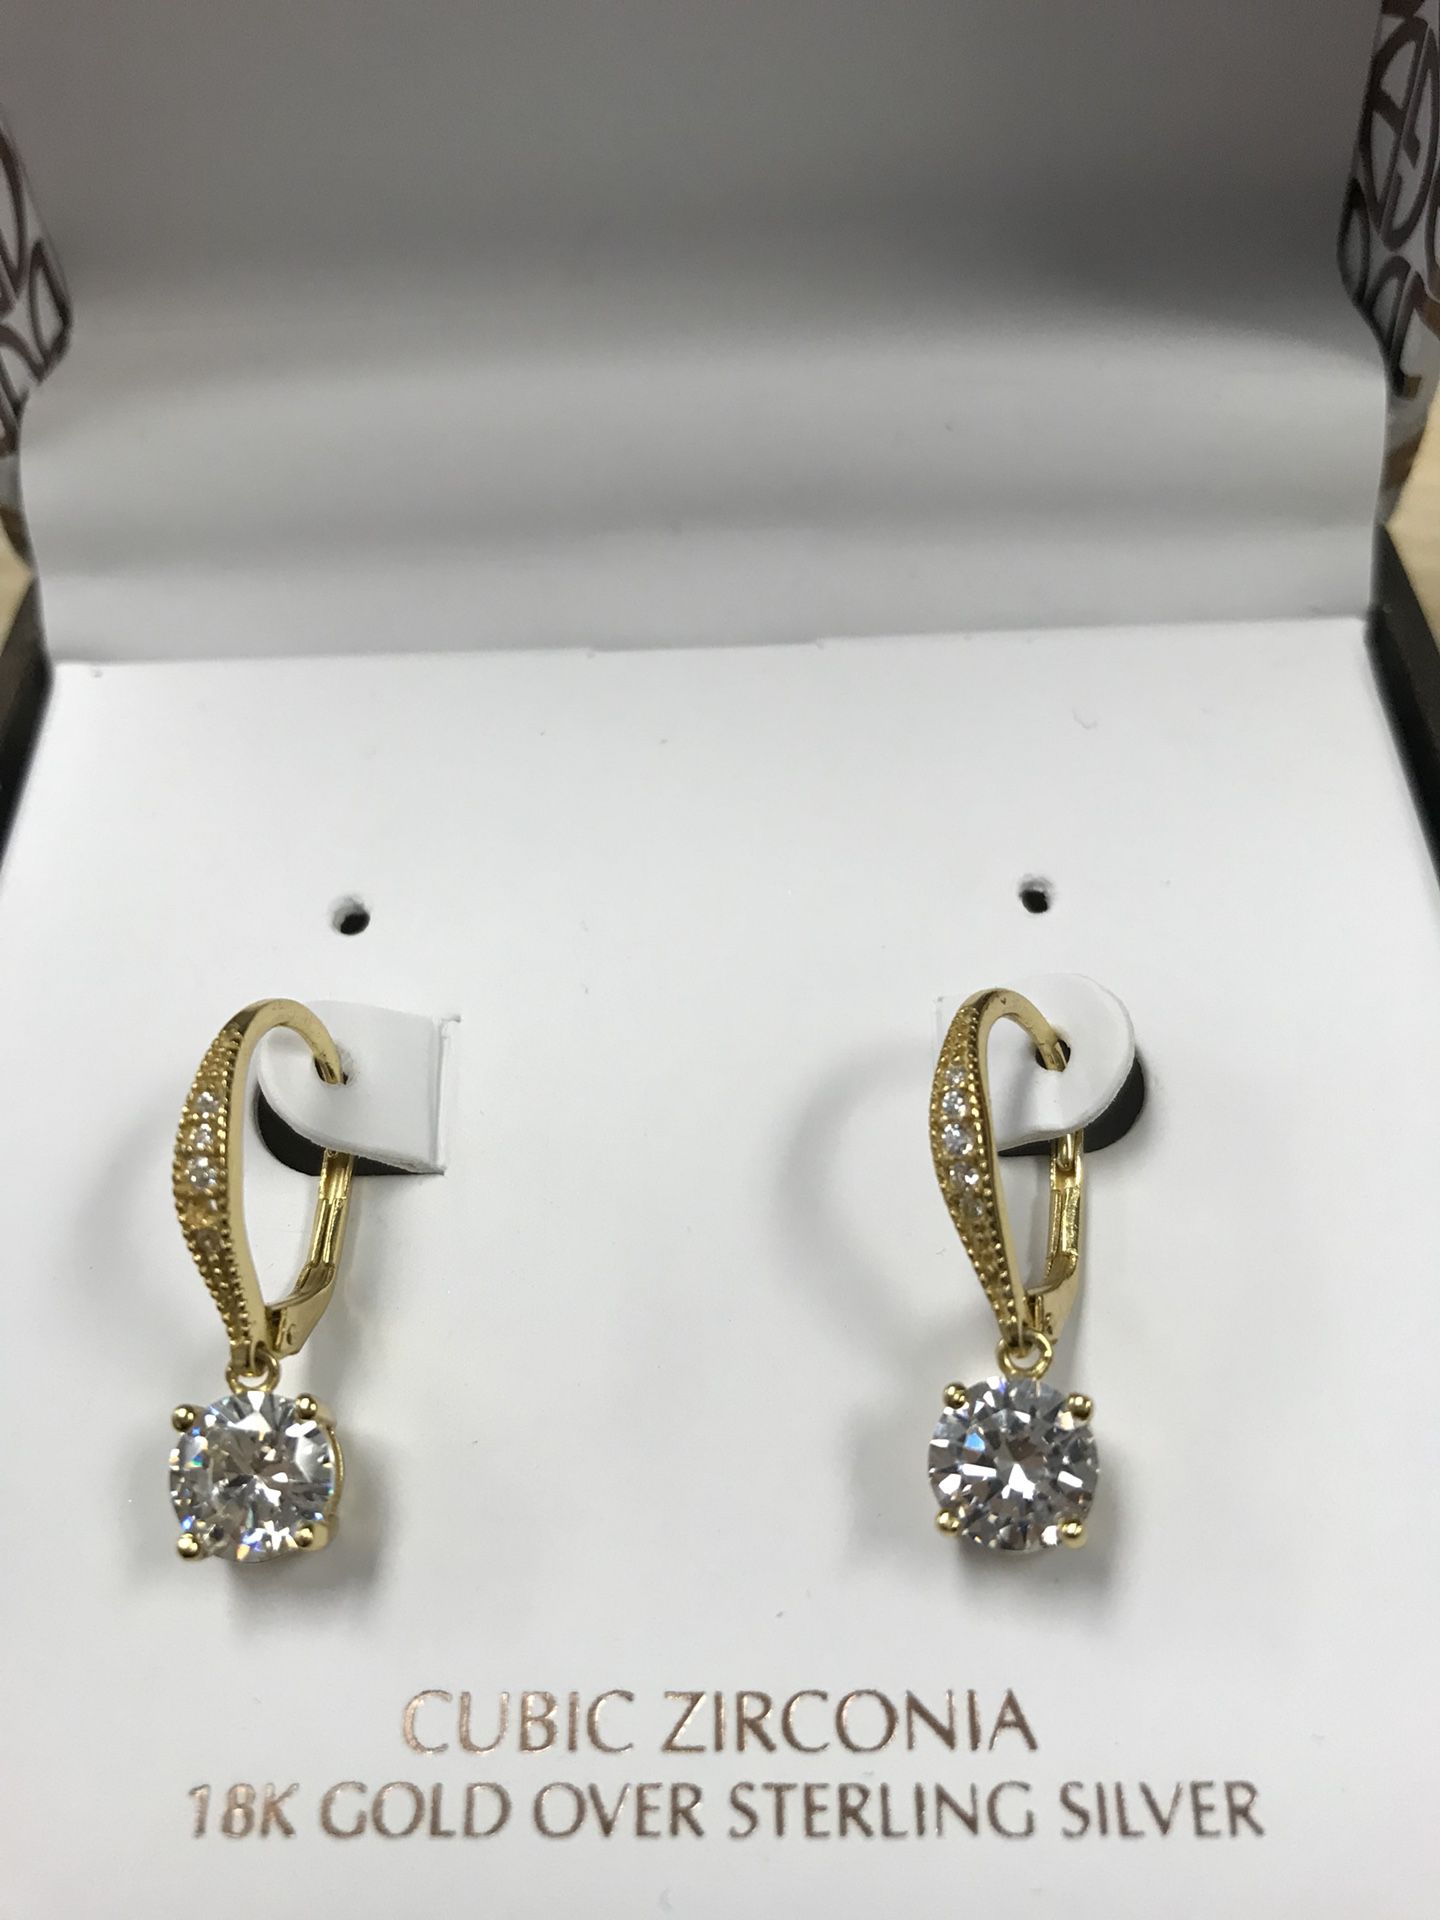 Giani Bernini” earrings. Gift and used only once. Valued at $85 from  Macy's. for Sale in Seattle, WA - OfferUp